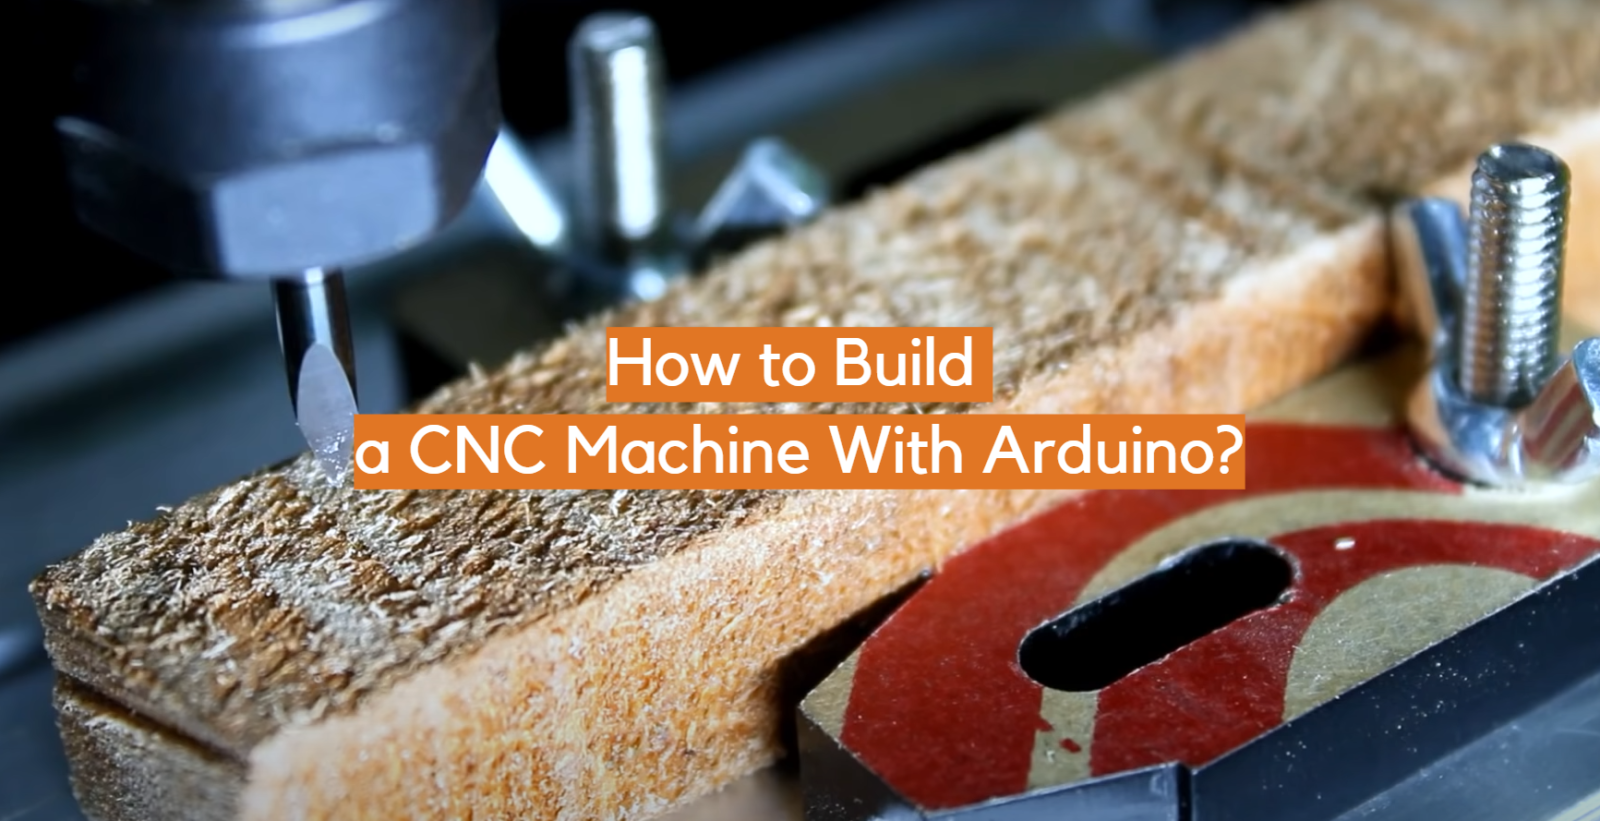 How to Build a CNC Machine With Arduino?